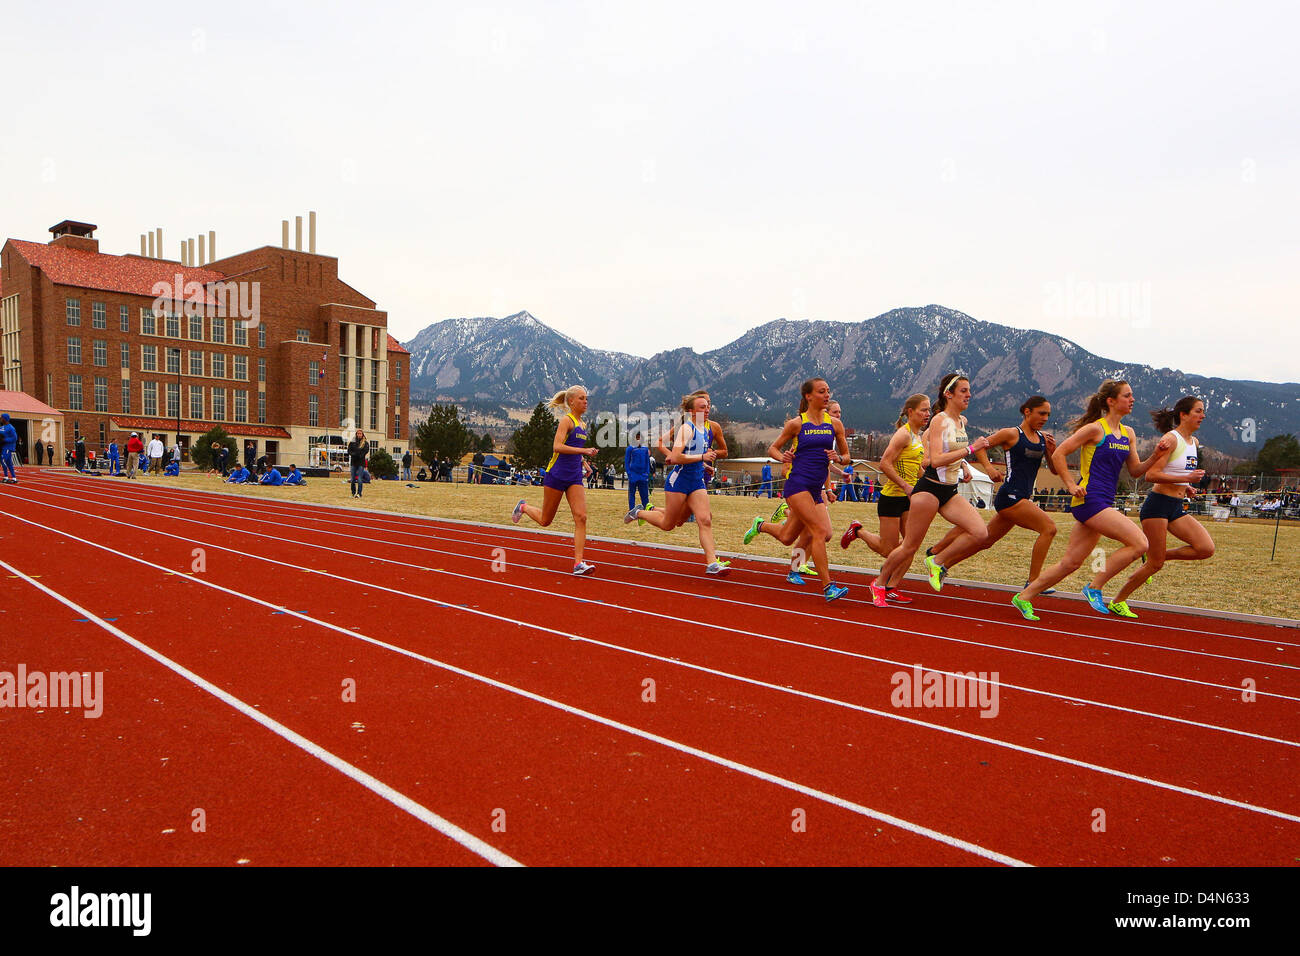 March 16, 2013 - Boulder, CO, United States of America - March 16, 2013: The first heat of the women's 1500 meters starts at Potts Field at the inaugural Jerry Quiller Classic at the University of Colorado campus in Boulder. Stock Photo